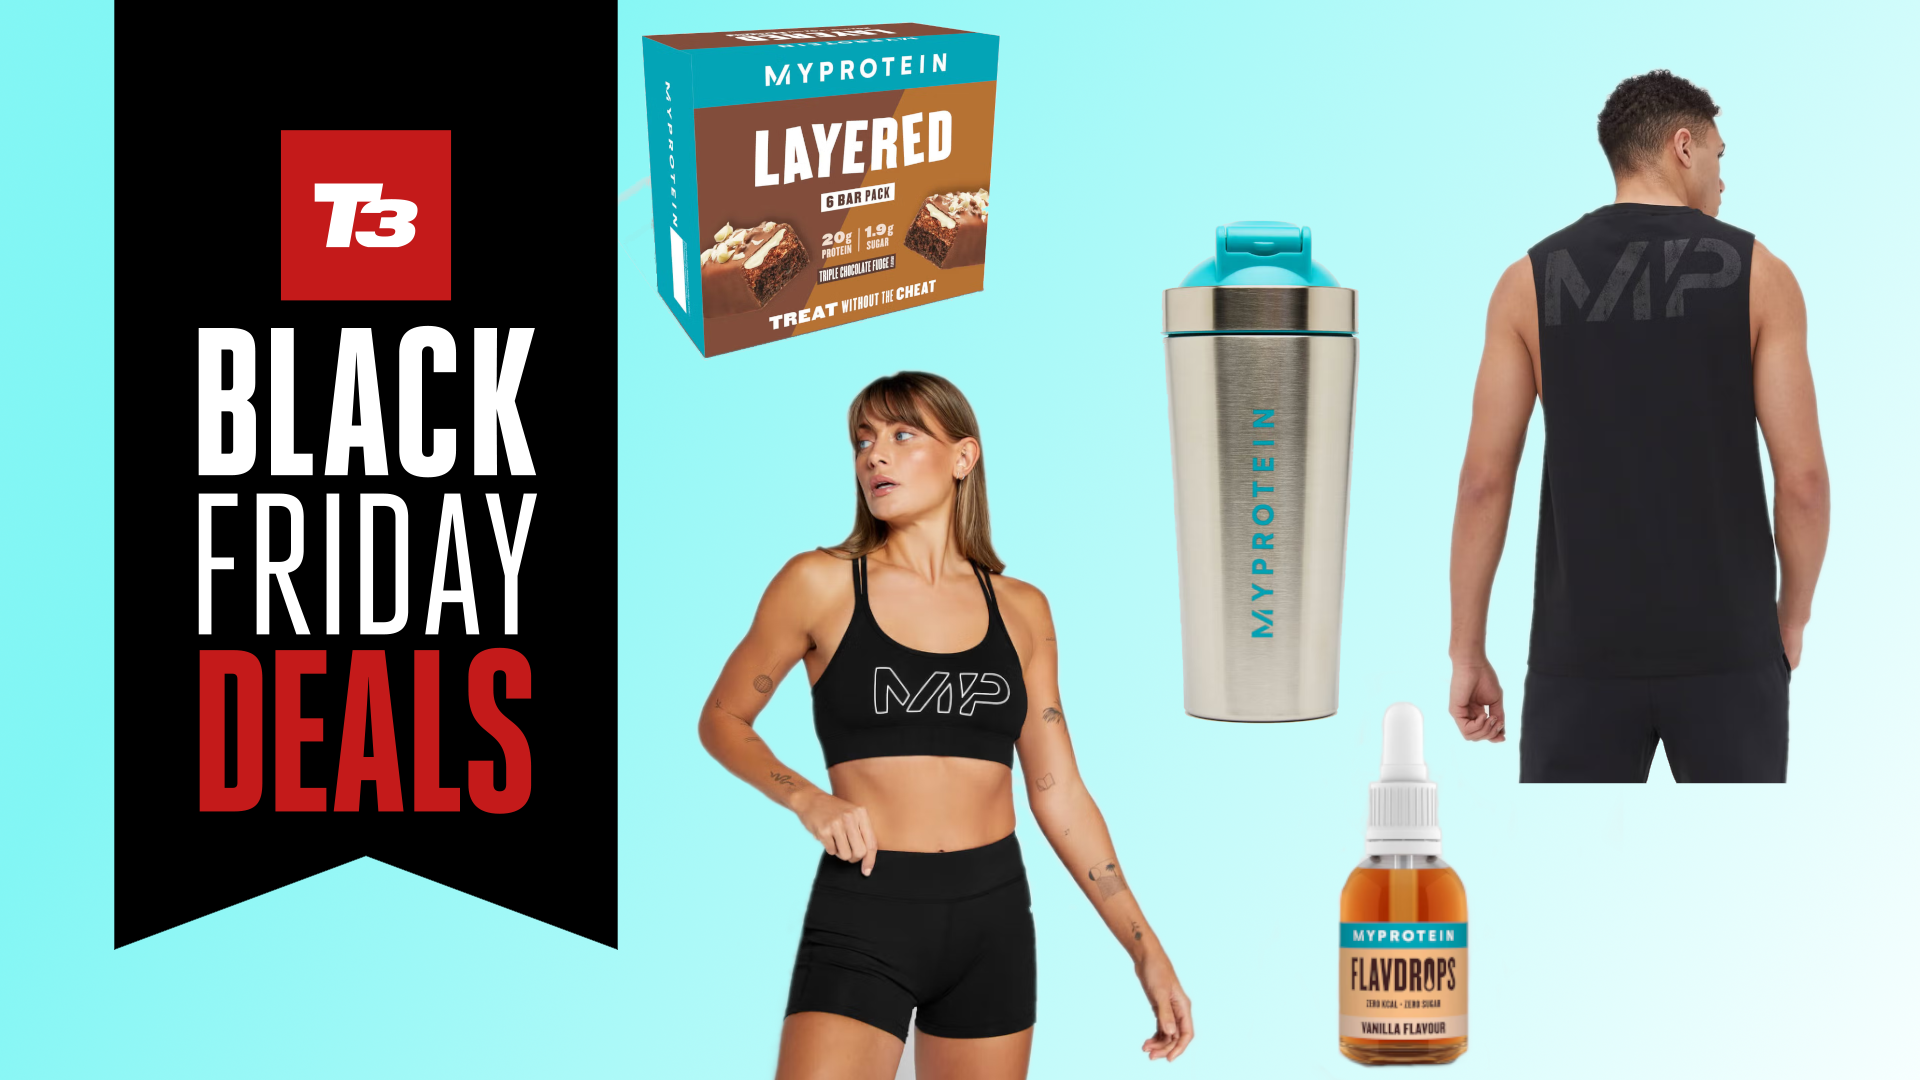 10 items for £10 (or less) I'm loving in Myprotein's Black Friday sale